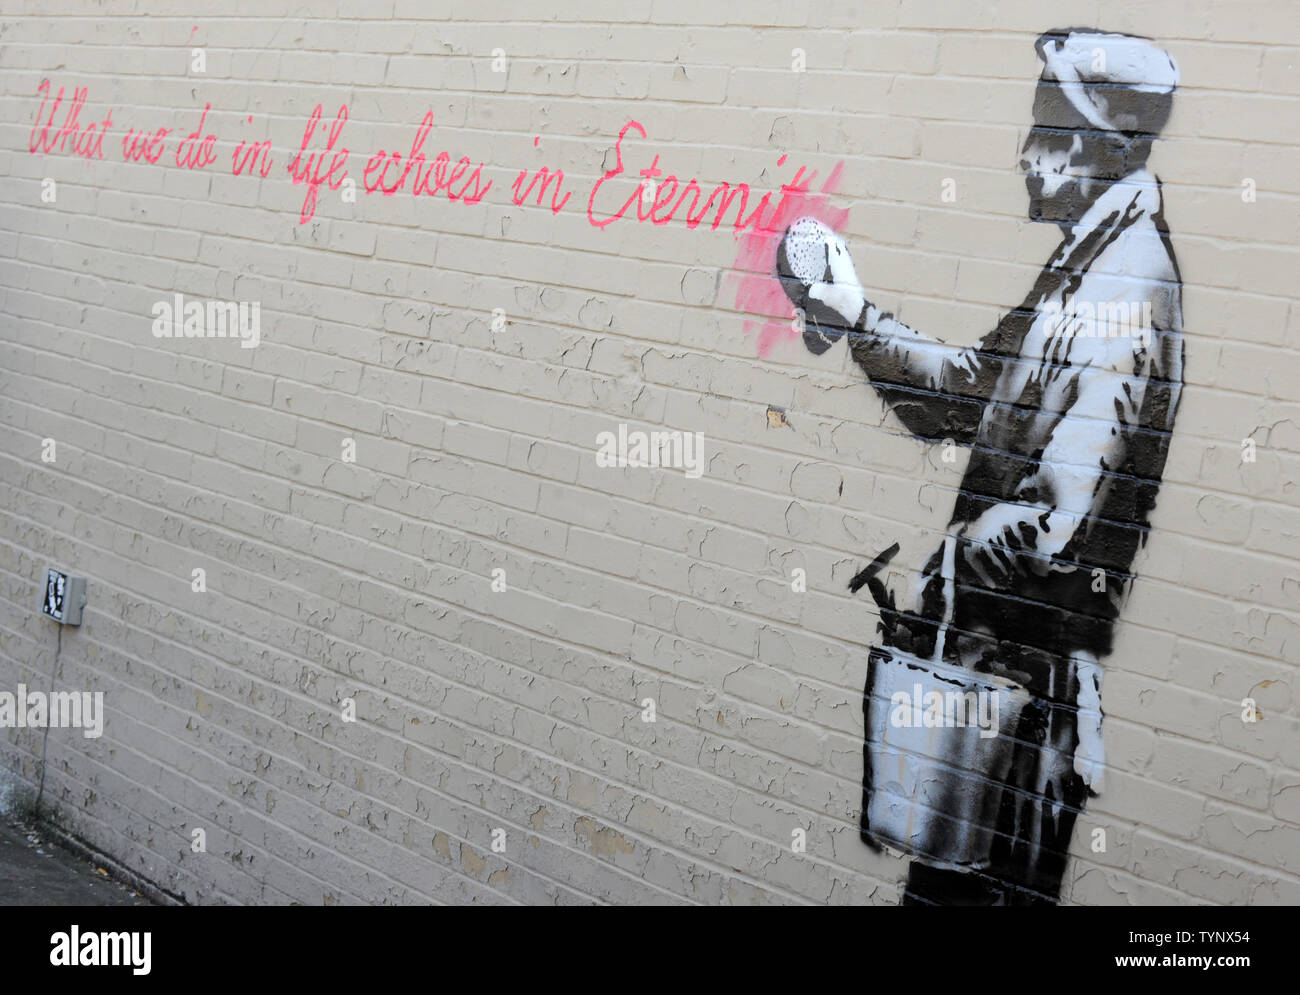 A mural created by British street artist Banksy is seen on a side of a building in Queens in New York City on October 14, 2013. Banksy is a pseudonymous England-based graffiti artist, political activist, film director, and painter. His satirical street art and subversive epigrams combine dark humor with graffiti done in a distinctive stenciling technique.    UPI/Dennis Van Tine Stock Photo